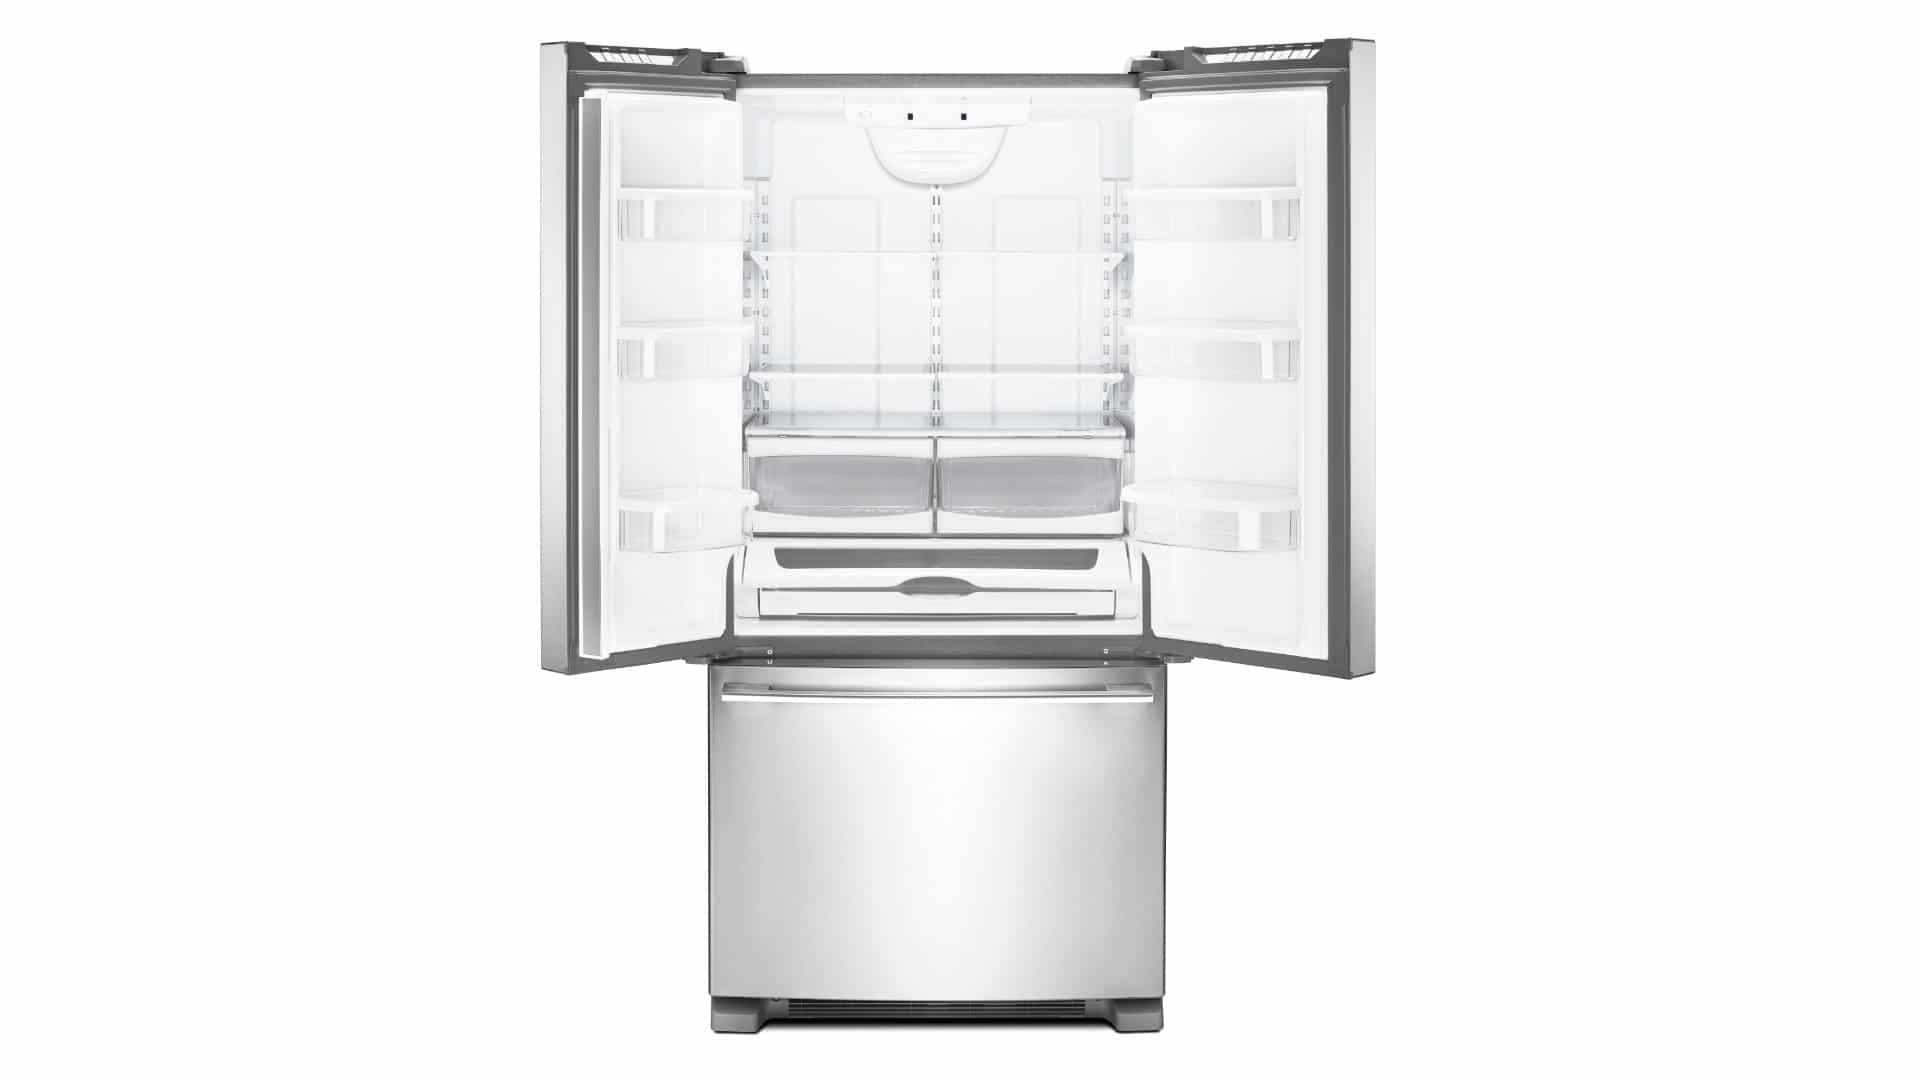 How To Fix A Samsung Fridge That Is Not Cooling How to Fix Samsung Refrigerator Not Cooling - Ocean Appliance